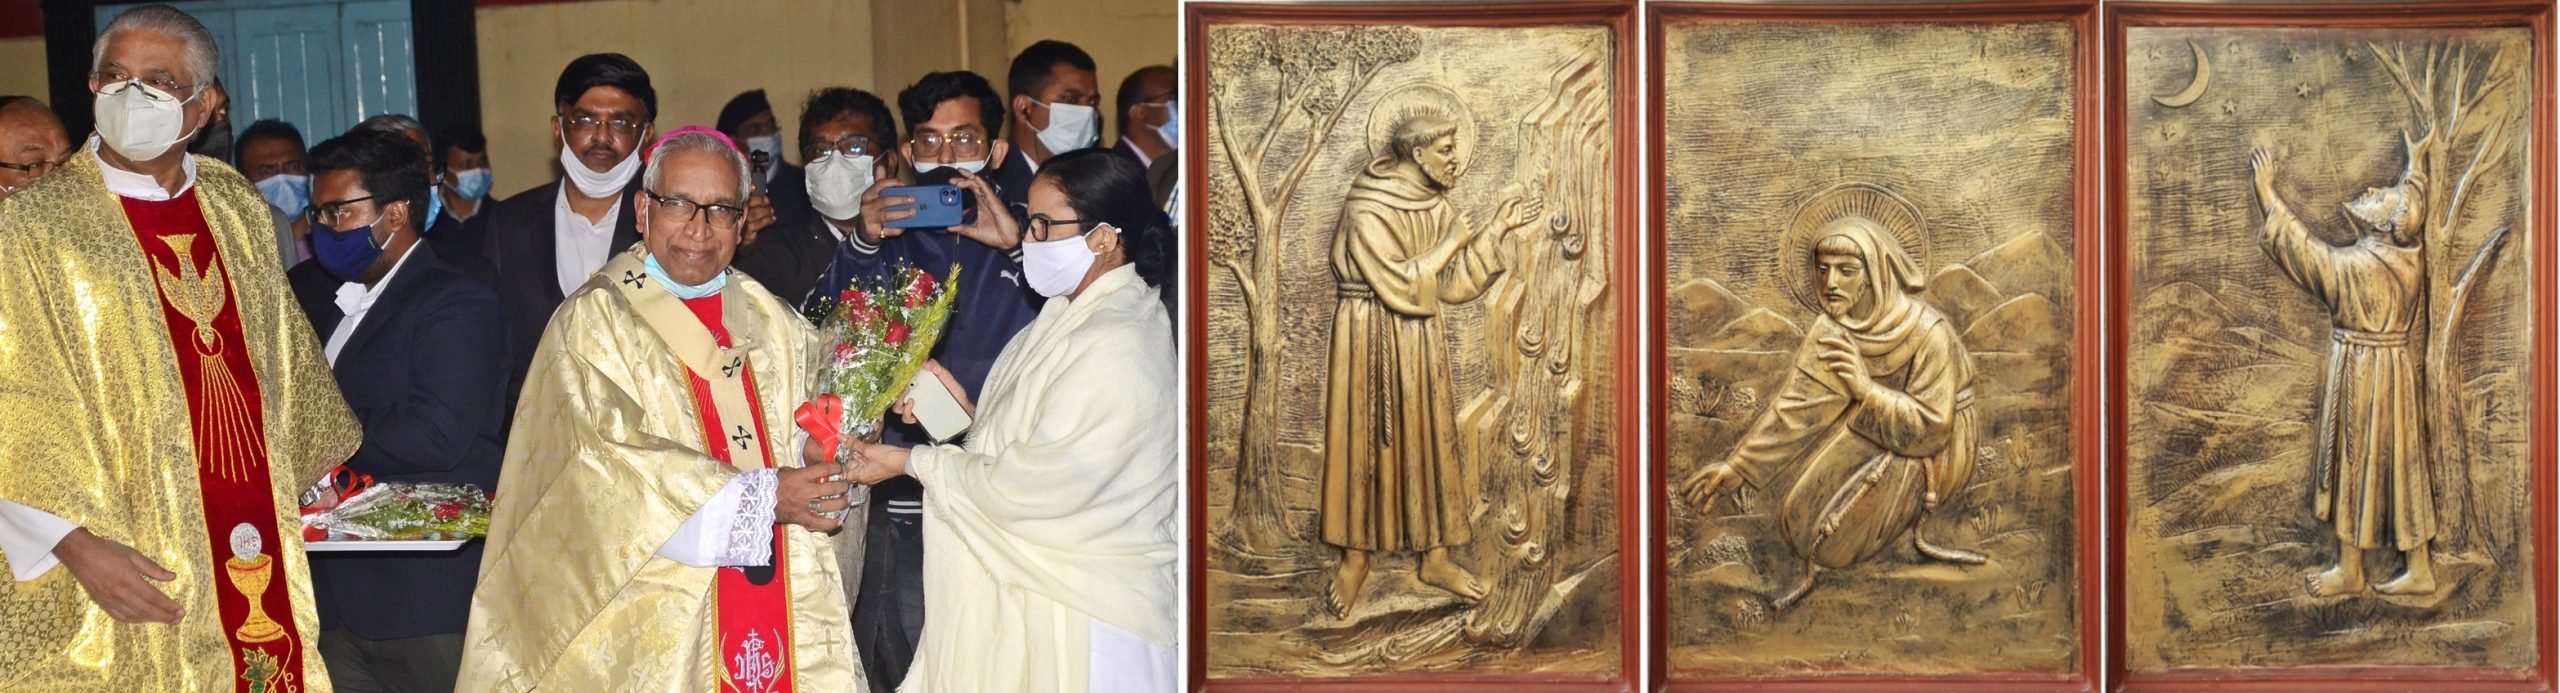 Father Franklin Menezes, Pro Vicar, His Grace Thomas D'Souza, Archbishop of Catholic Diocese of Calcutta, welcoming Chief Minister Mamata Banerjee at The Cathedral of the Most Holy Rosary in Kolkata on Christmas Eve. The chief minister also inaugurated a special exhibition on St Francis Assisi the patron saint of environment and originator of the tradition of cribs on Christmas Eve.